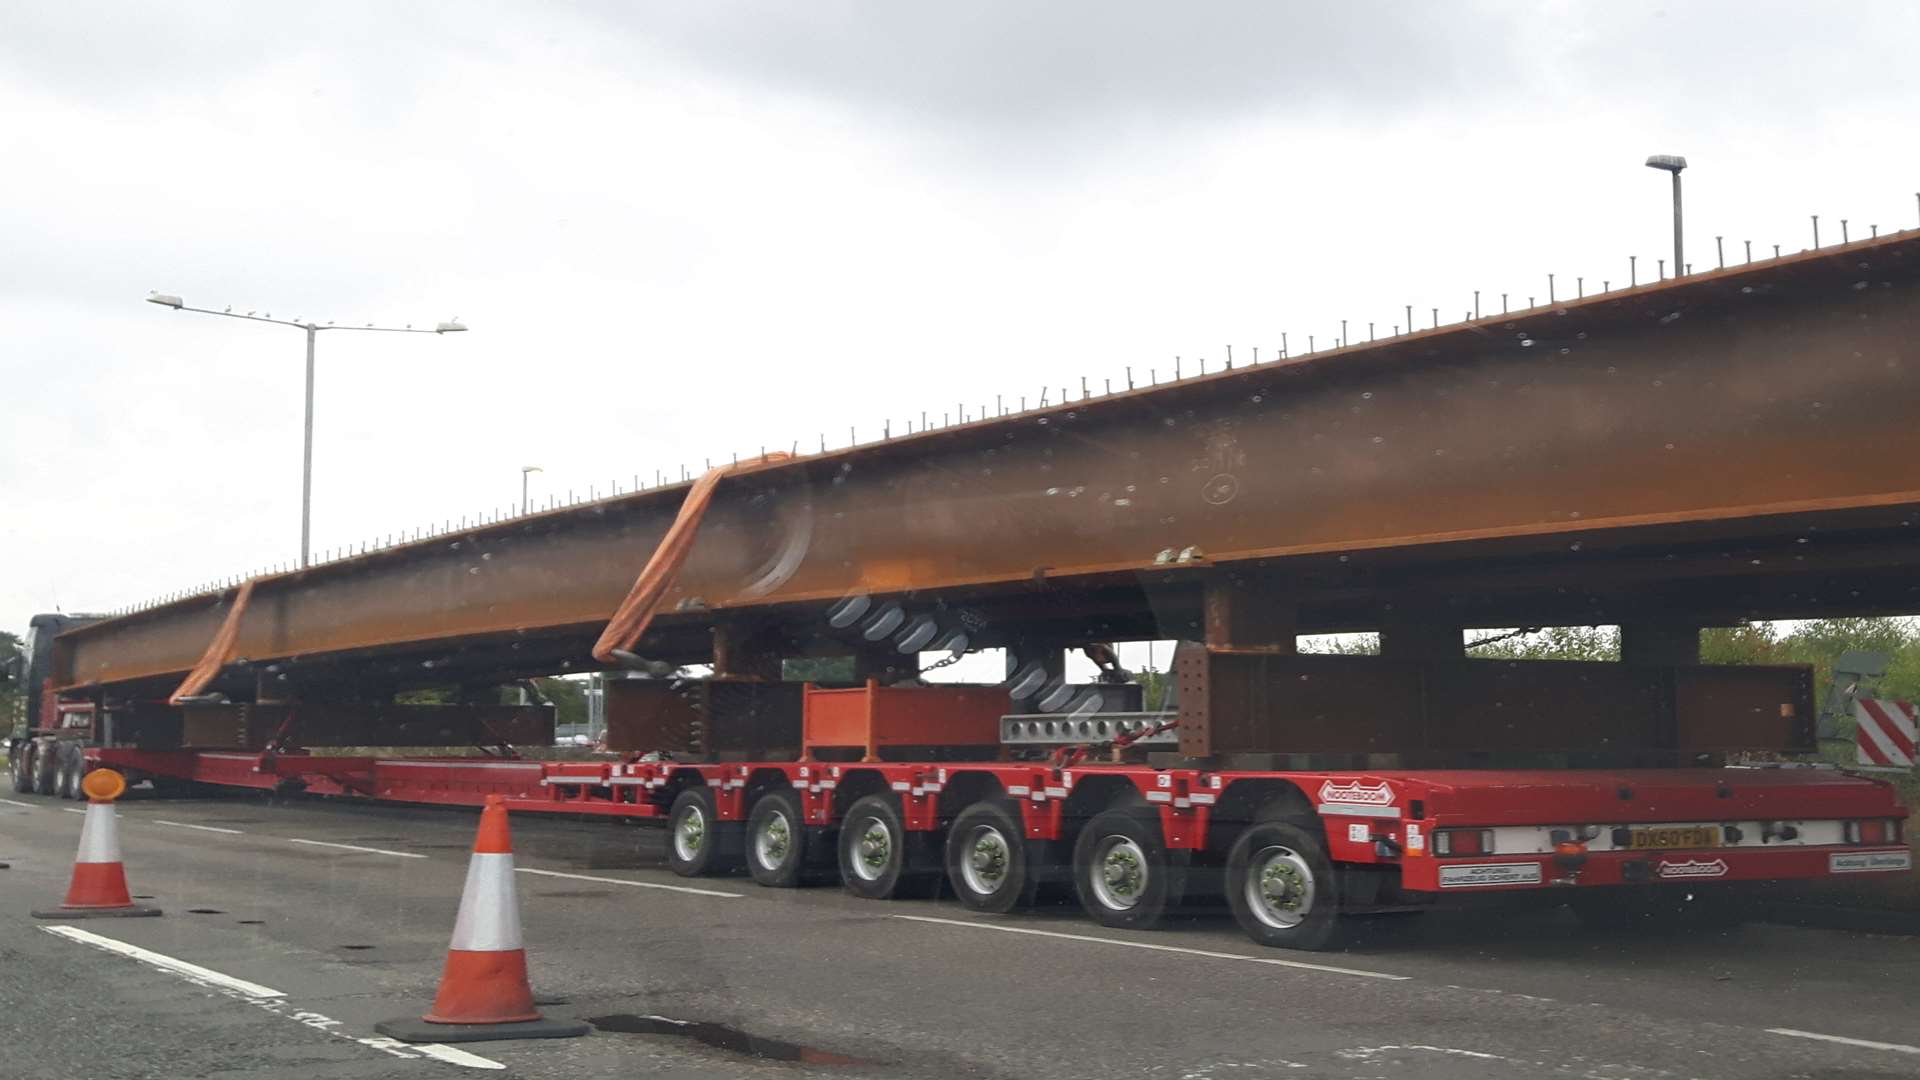 Part of the bridge deck parked on the A228 ahead of M20 closure